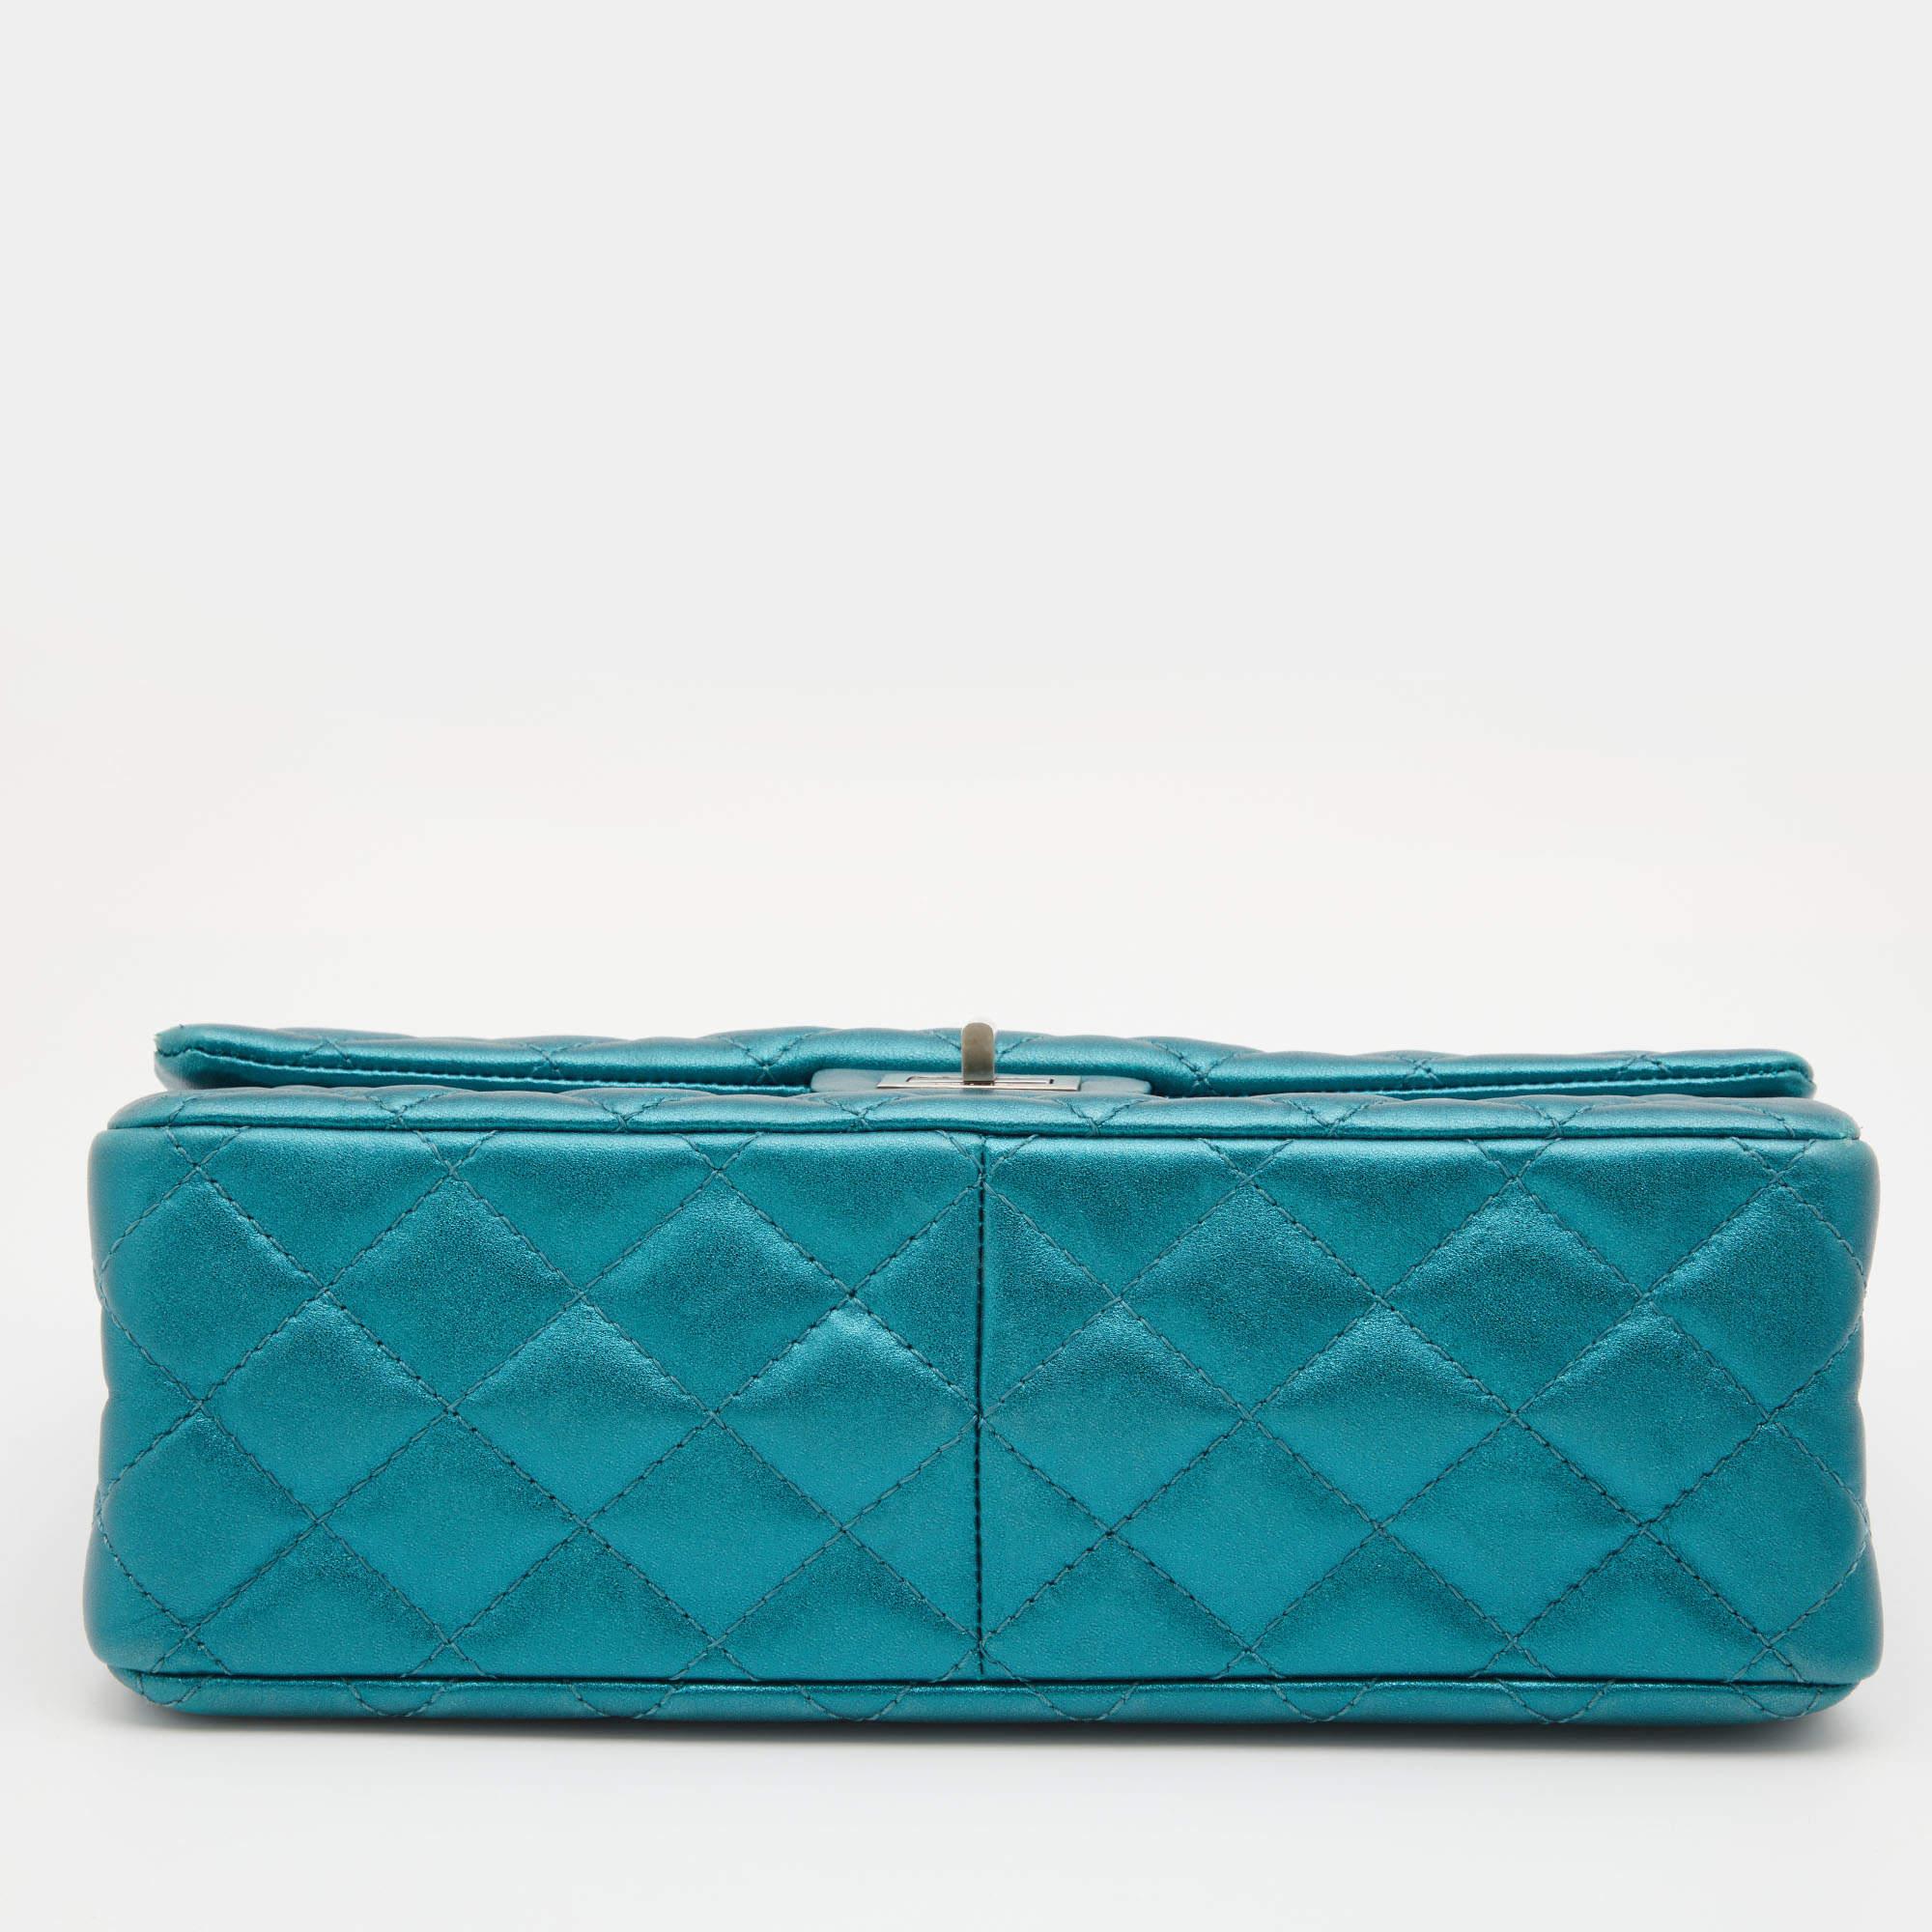 Chanel Metallic Teal Blue Quilted Leather Reissue 2.55 Classic 226 Flap Bag 1